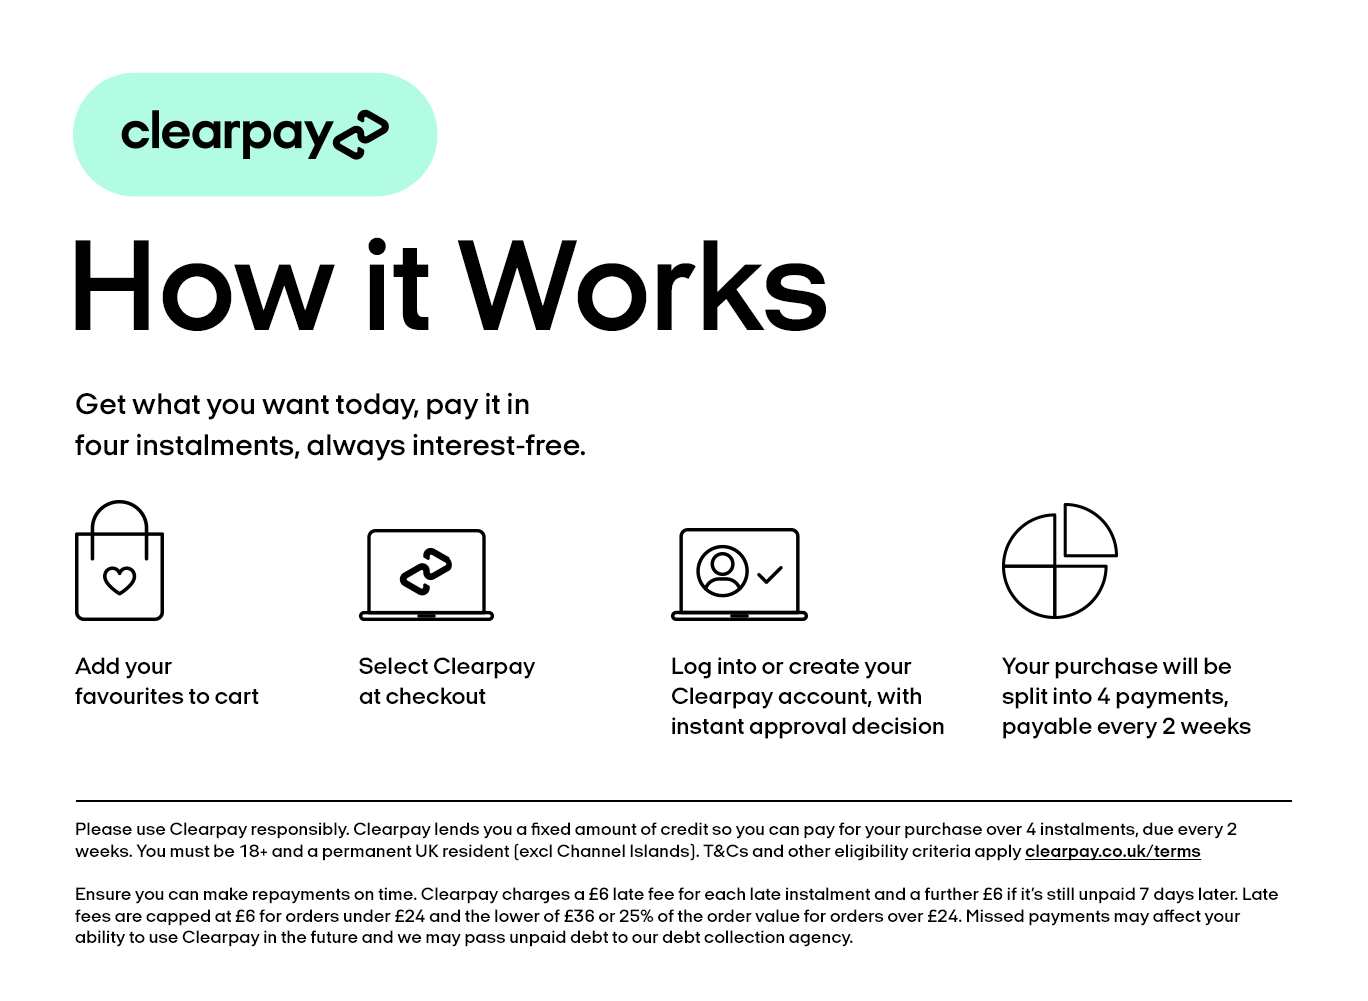 clearpay-how-it-works-image